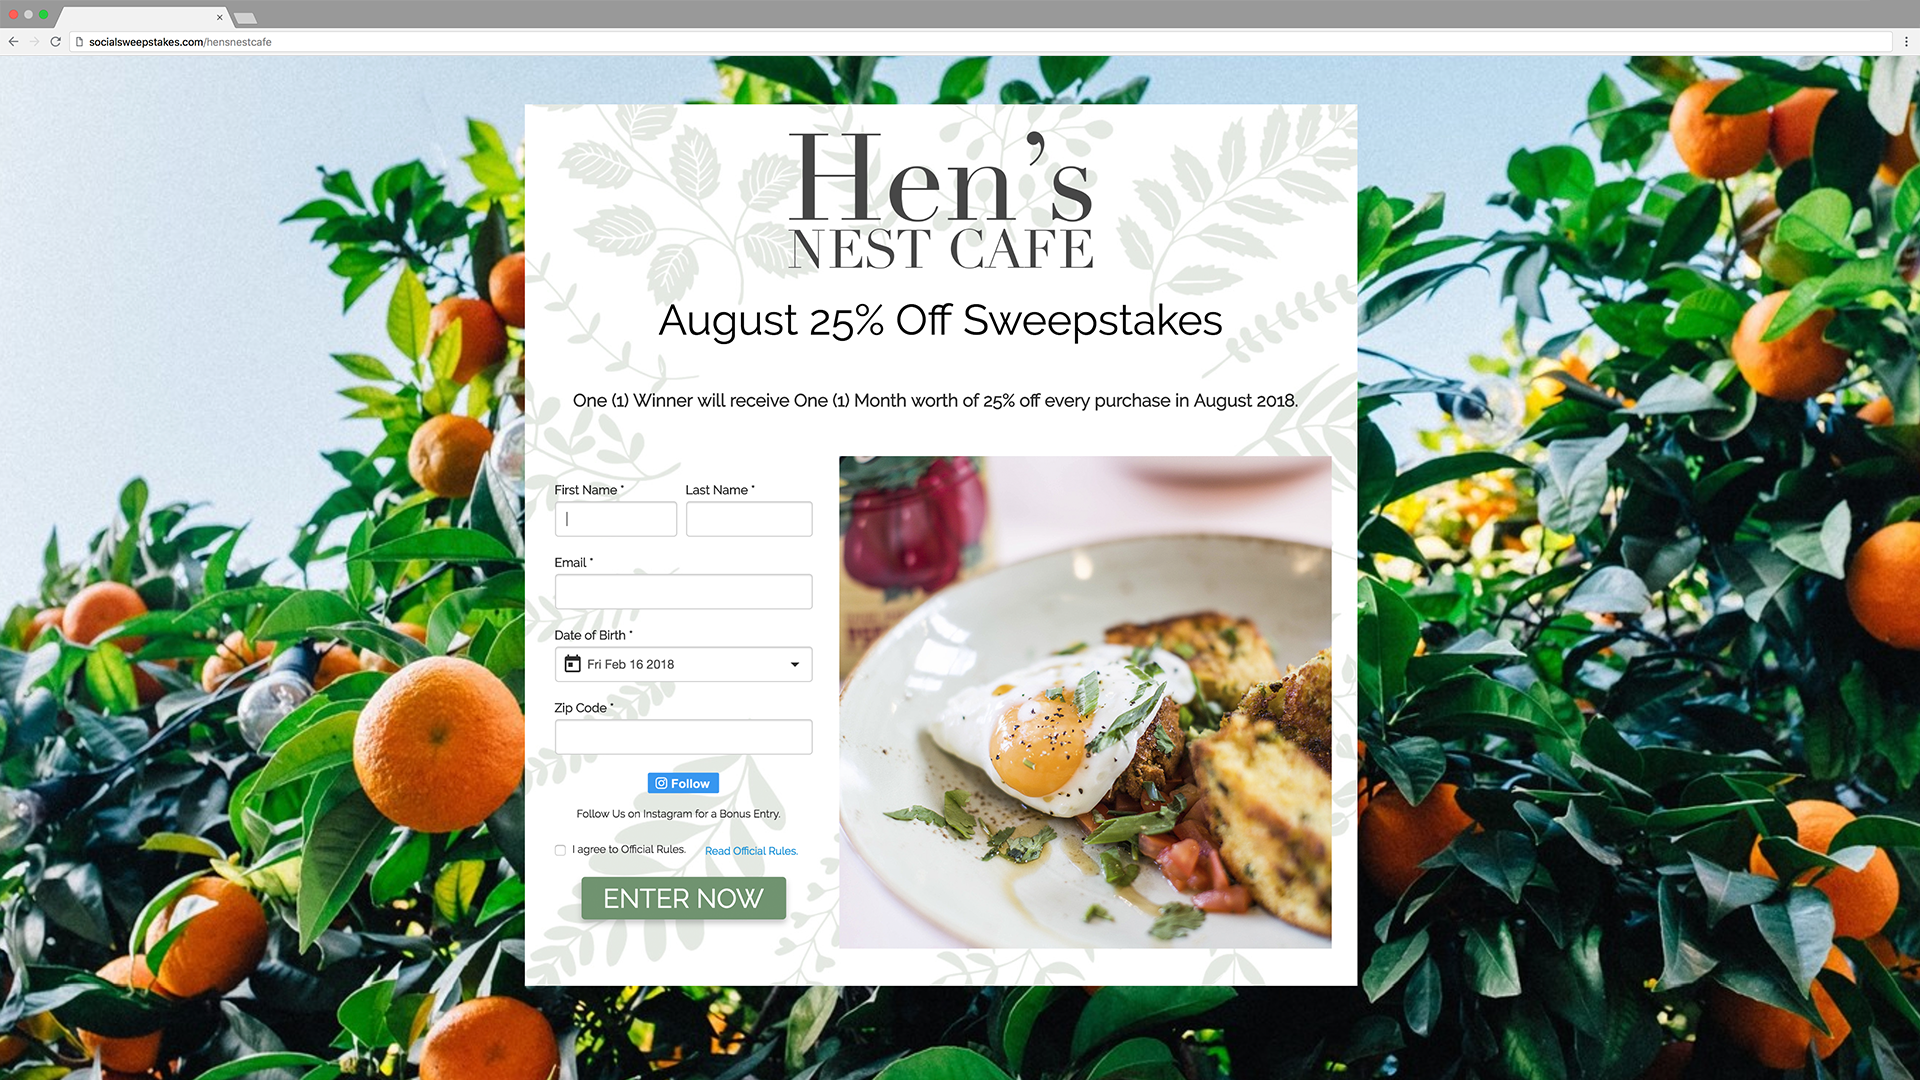 Sweepstakes landing page for hen's nest cafe